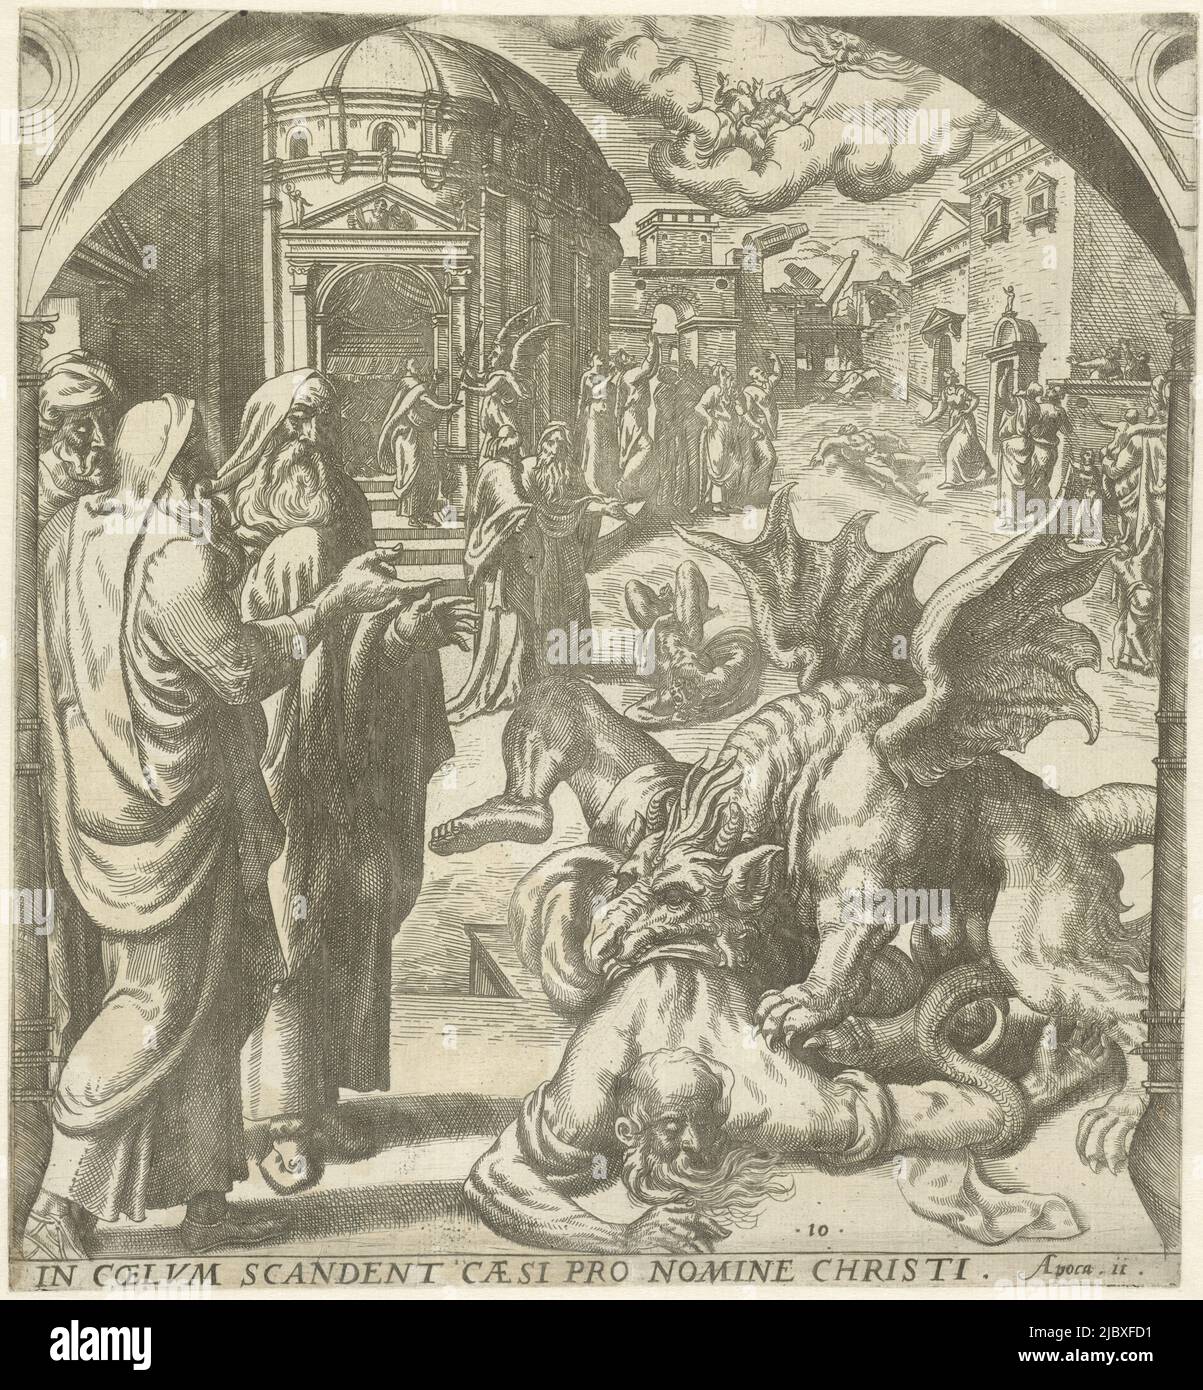 In a city, two witnesses of God are torn apart by a beast with wings. People come to watch the battle. In the background on the right the two witnesses are called to heaven by God. At that moment an earthquake comes and destroys the city. In the background on the left the apostle John measures the temple with a ruler (Op. 11: 1-13), Two witnesses of God are devoured by a beast Candelabra atqve stola grandae vvm cernis amictvm, Revelation of John (series title)., print maker: Gerard van Groeningen, Antwerp, 1563 - 1574, paper, etching, engraving, h 269 mm × w 245 mm Stock Photo